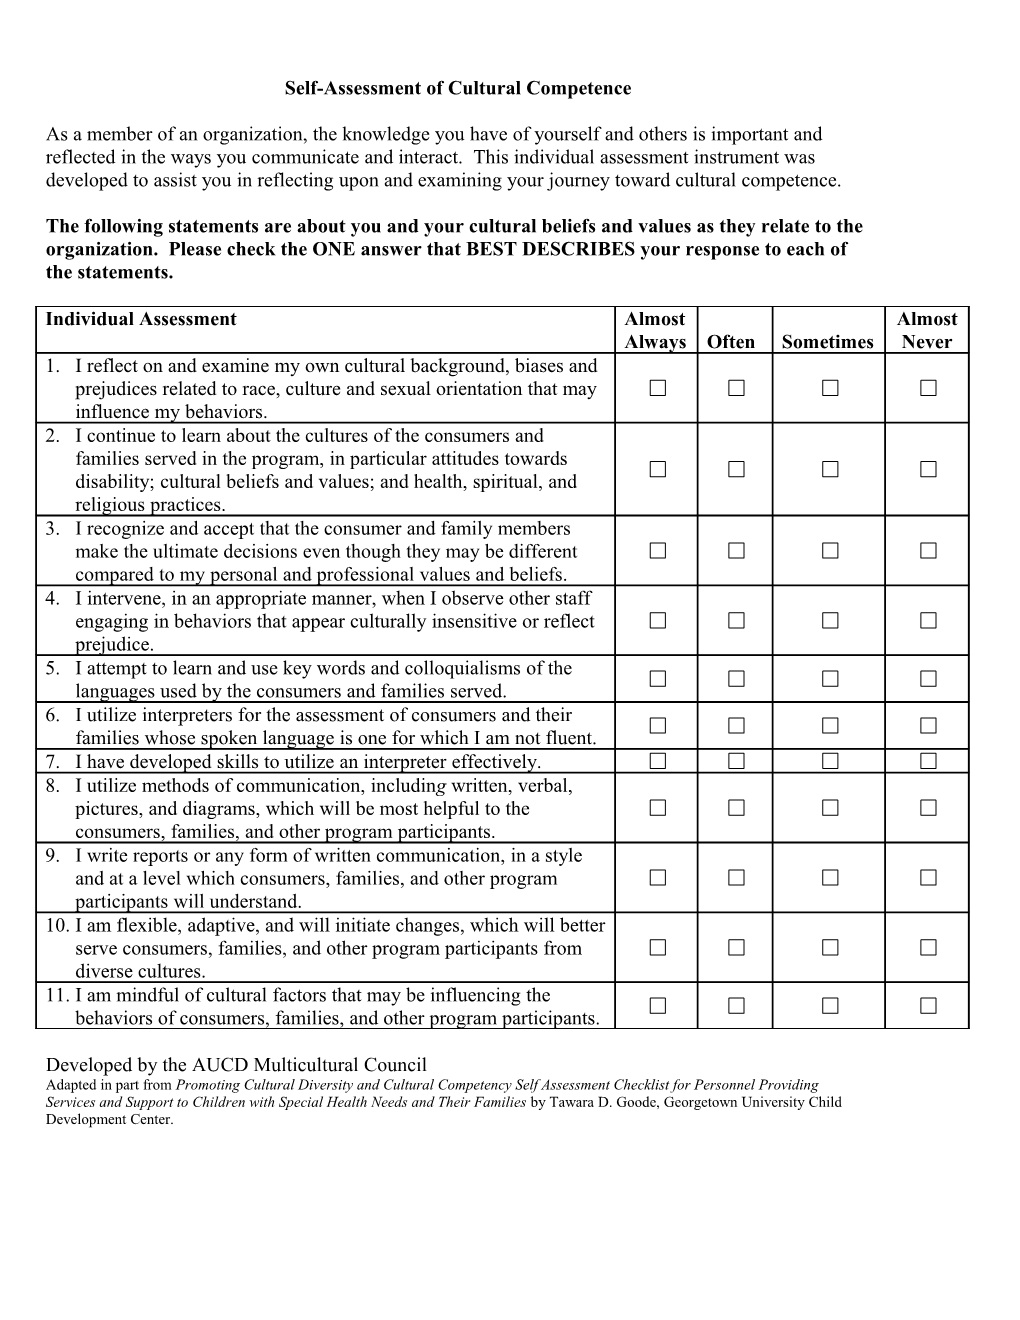 Individual Assessment of Cultural Competence